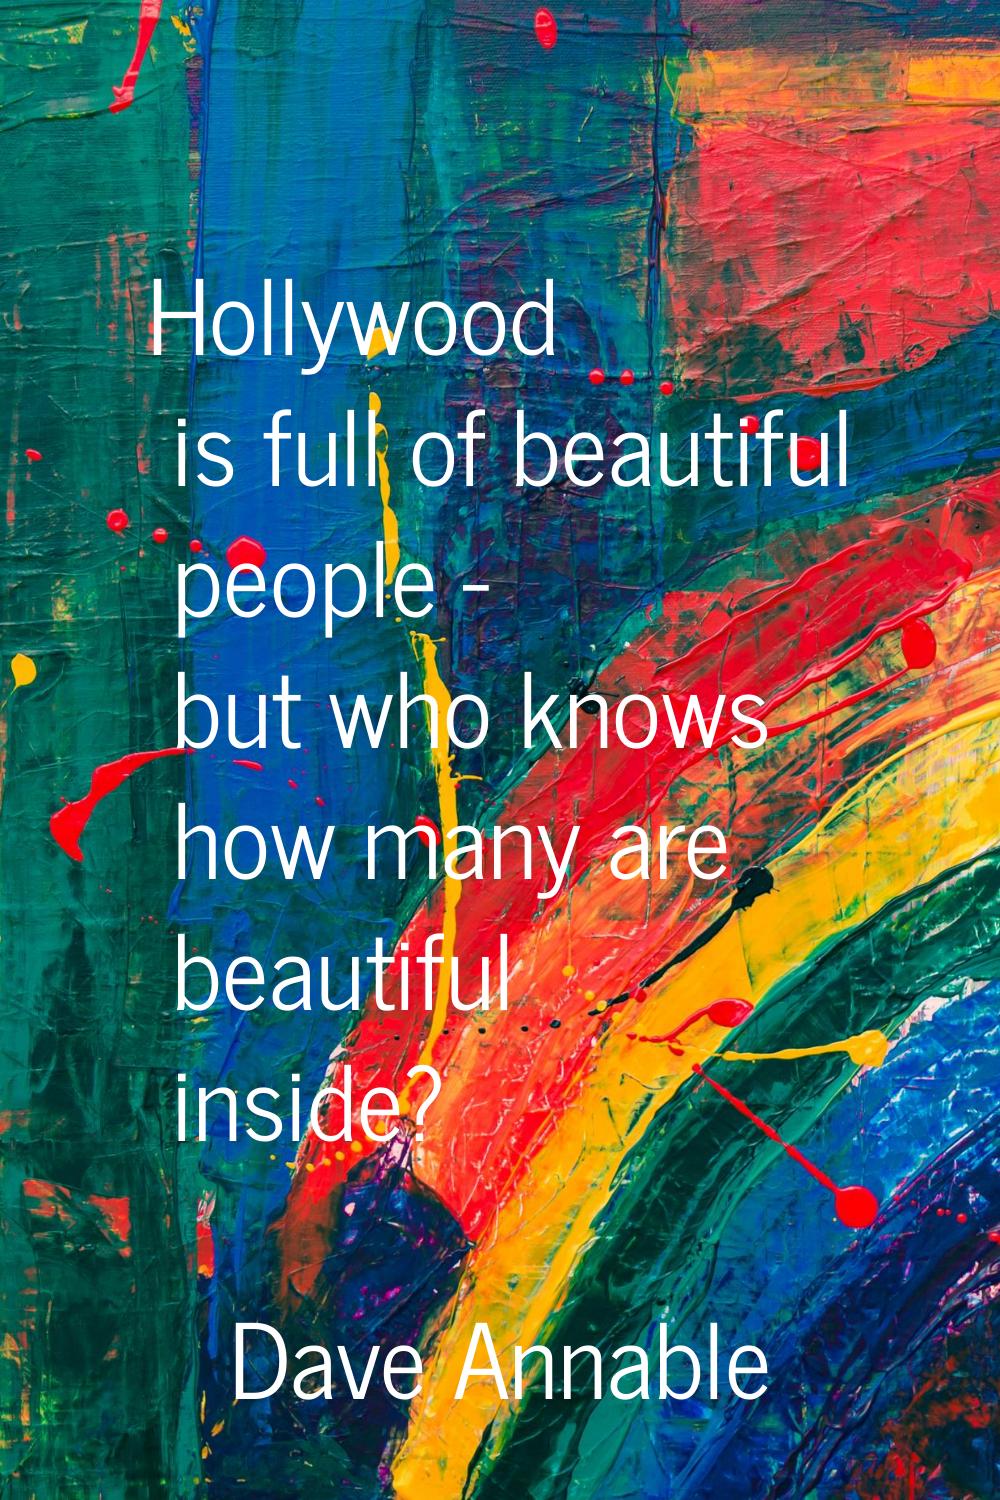 Hollywood is full of beautiful people - but who knows how many are beautiful inside?